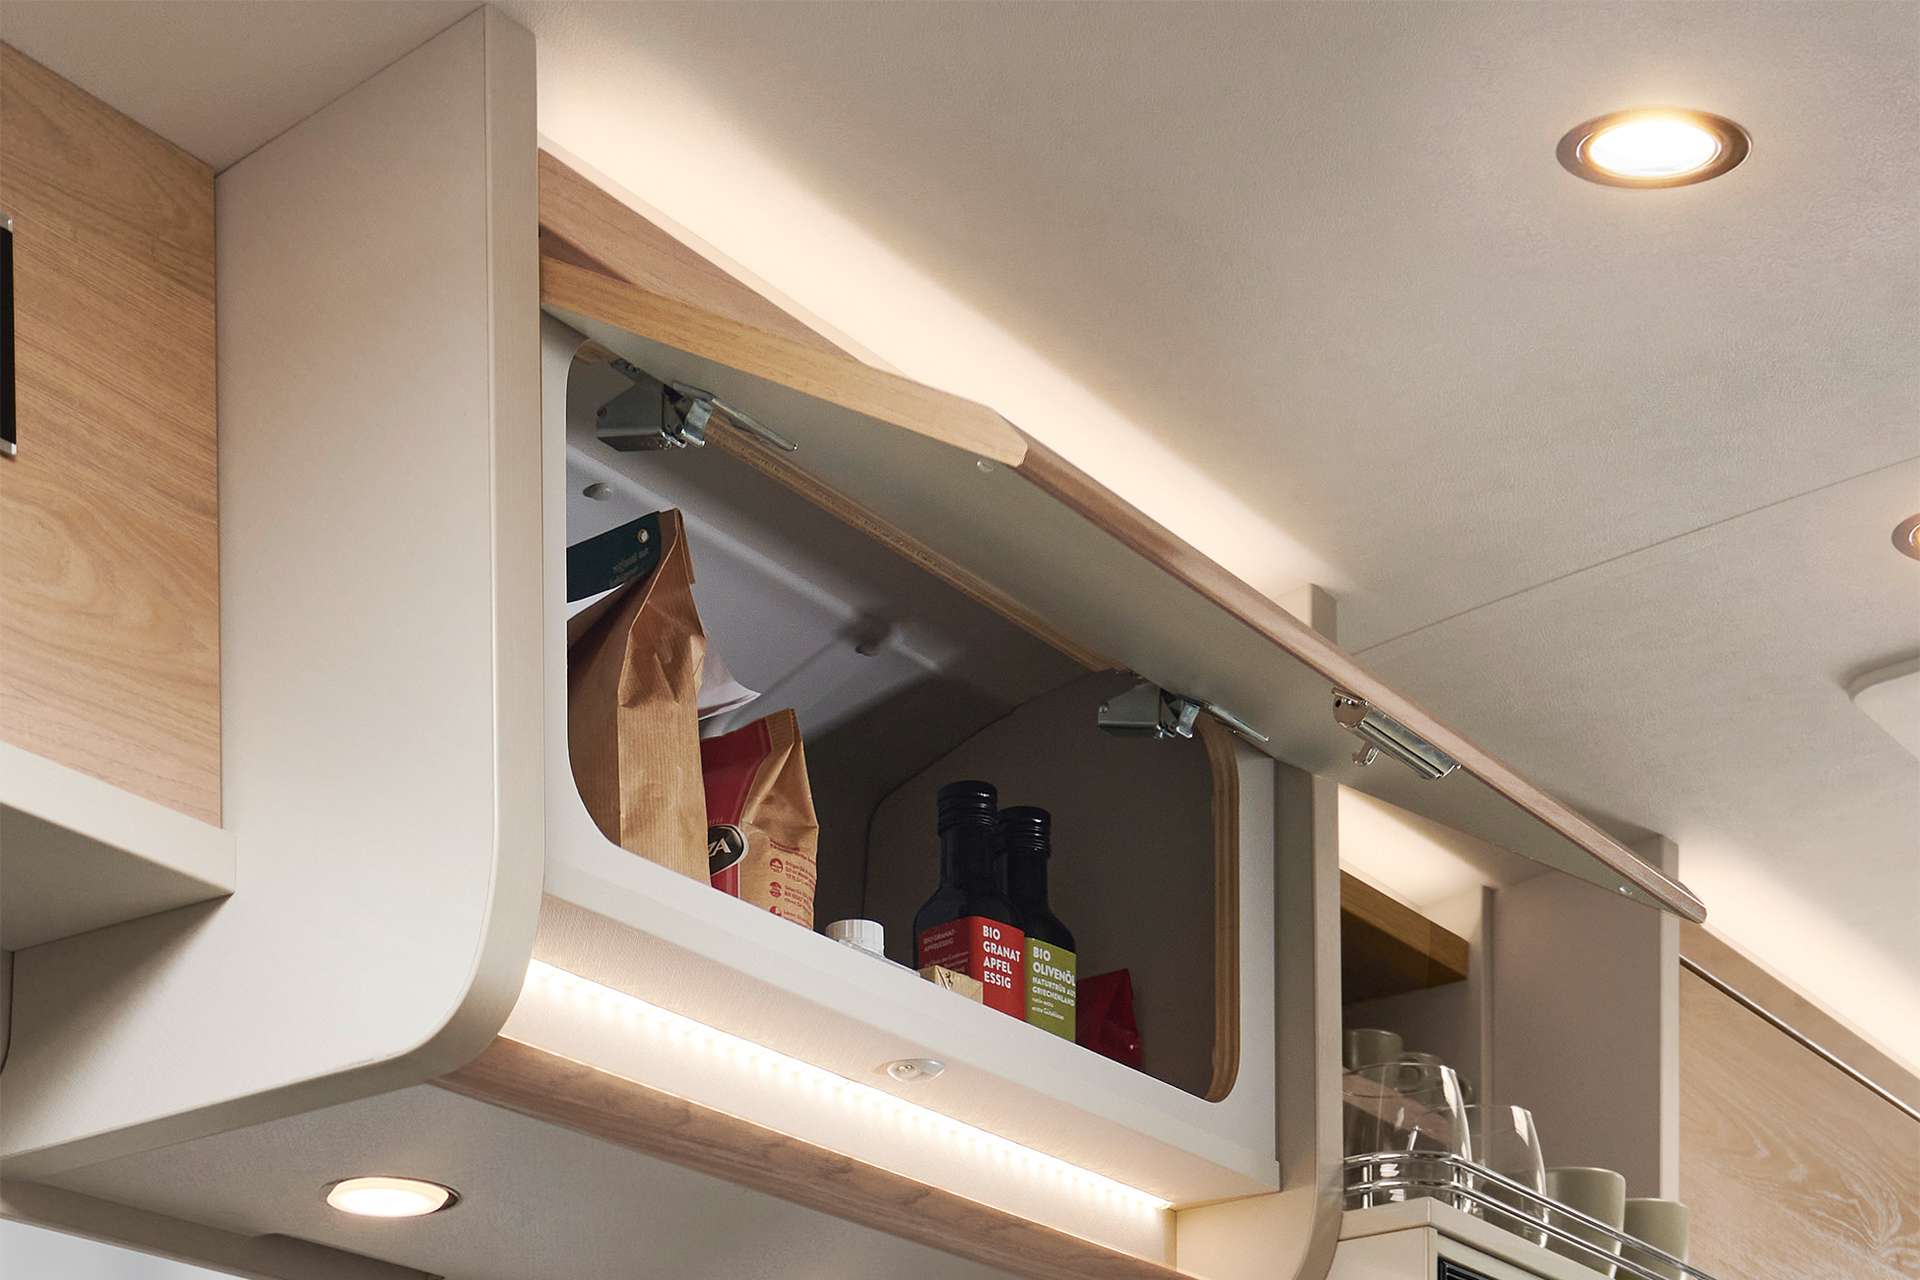 Chic and modern – the handleless overhead lockers in the Globetrail feature bevelled edges and ambient lighting.